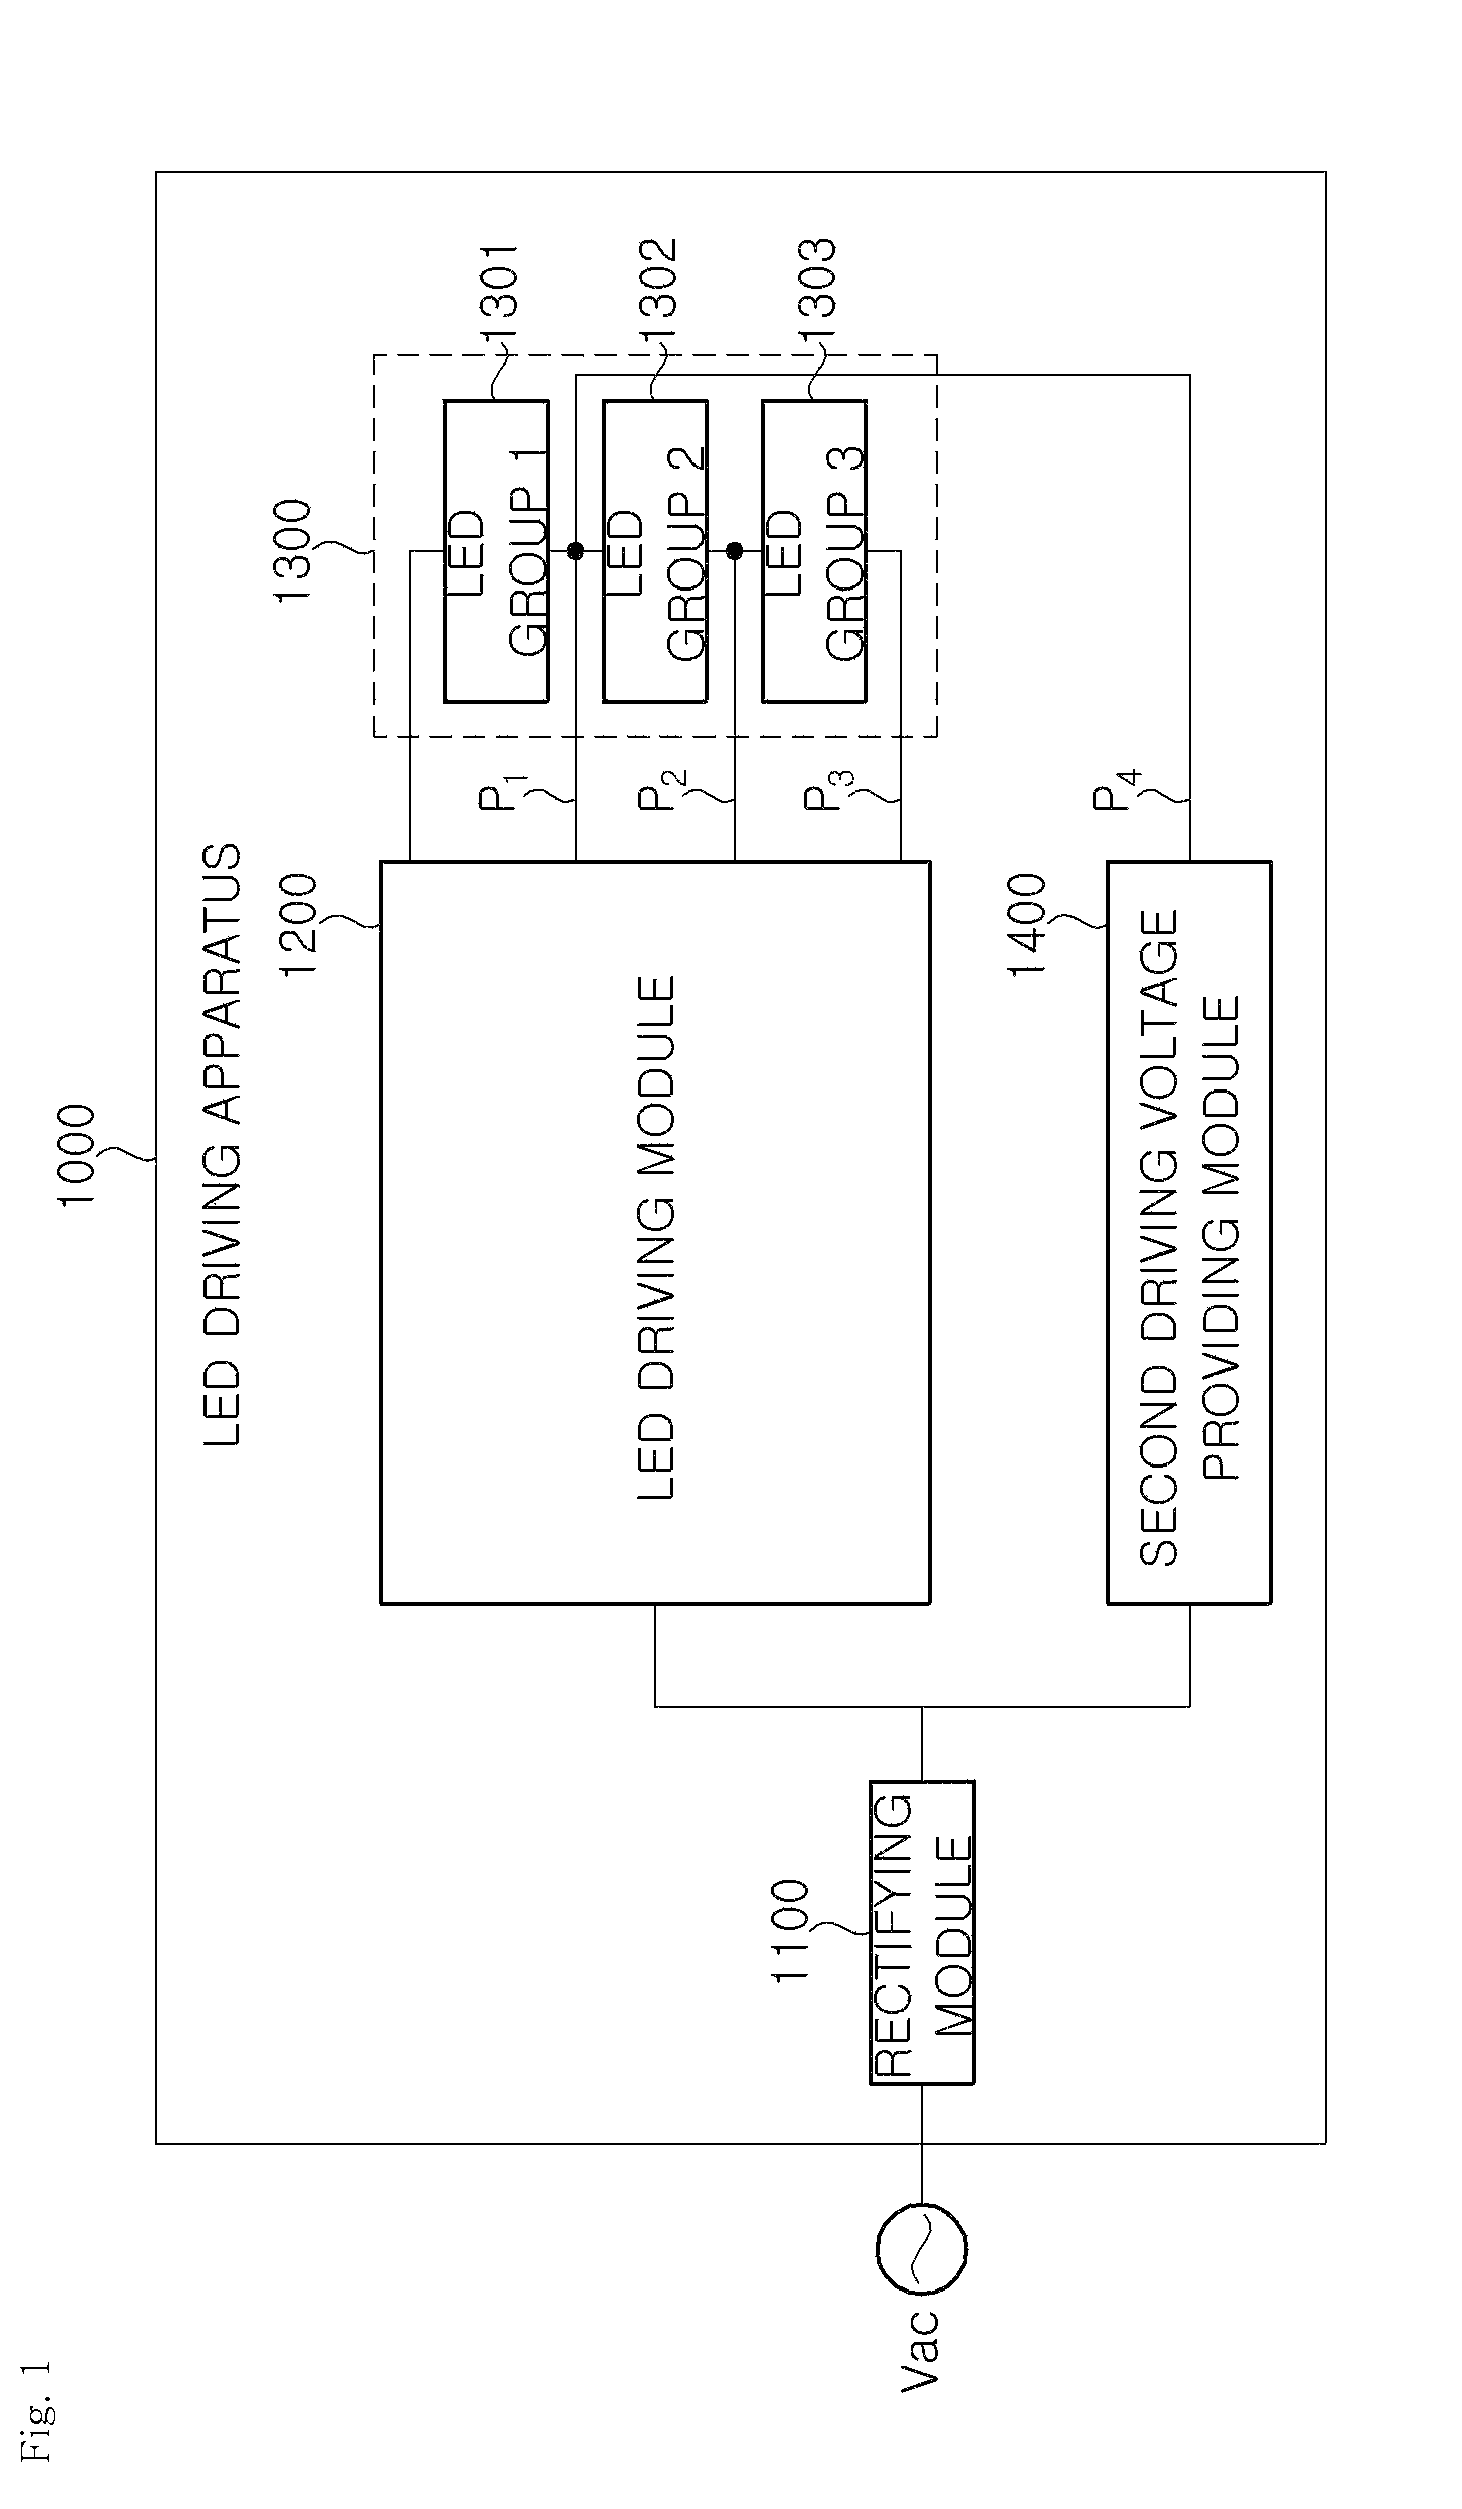 LED driving apparatus and driving method for continuously driving LED